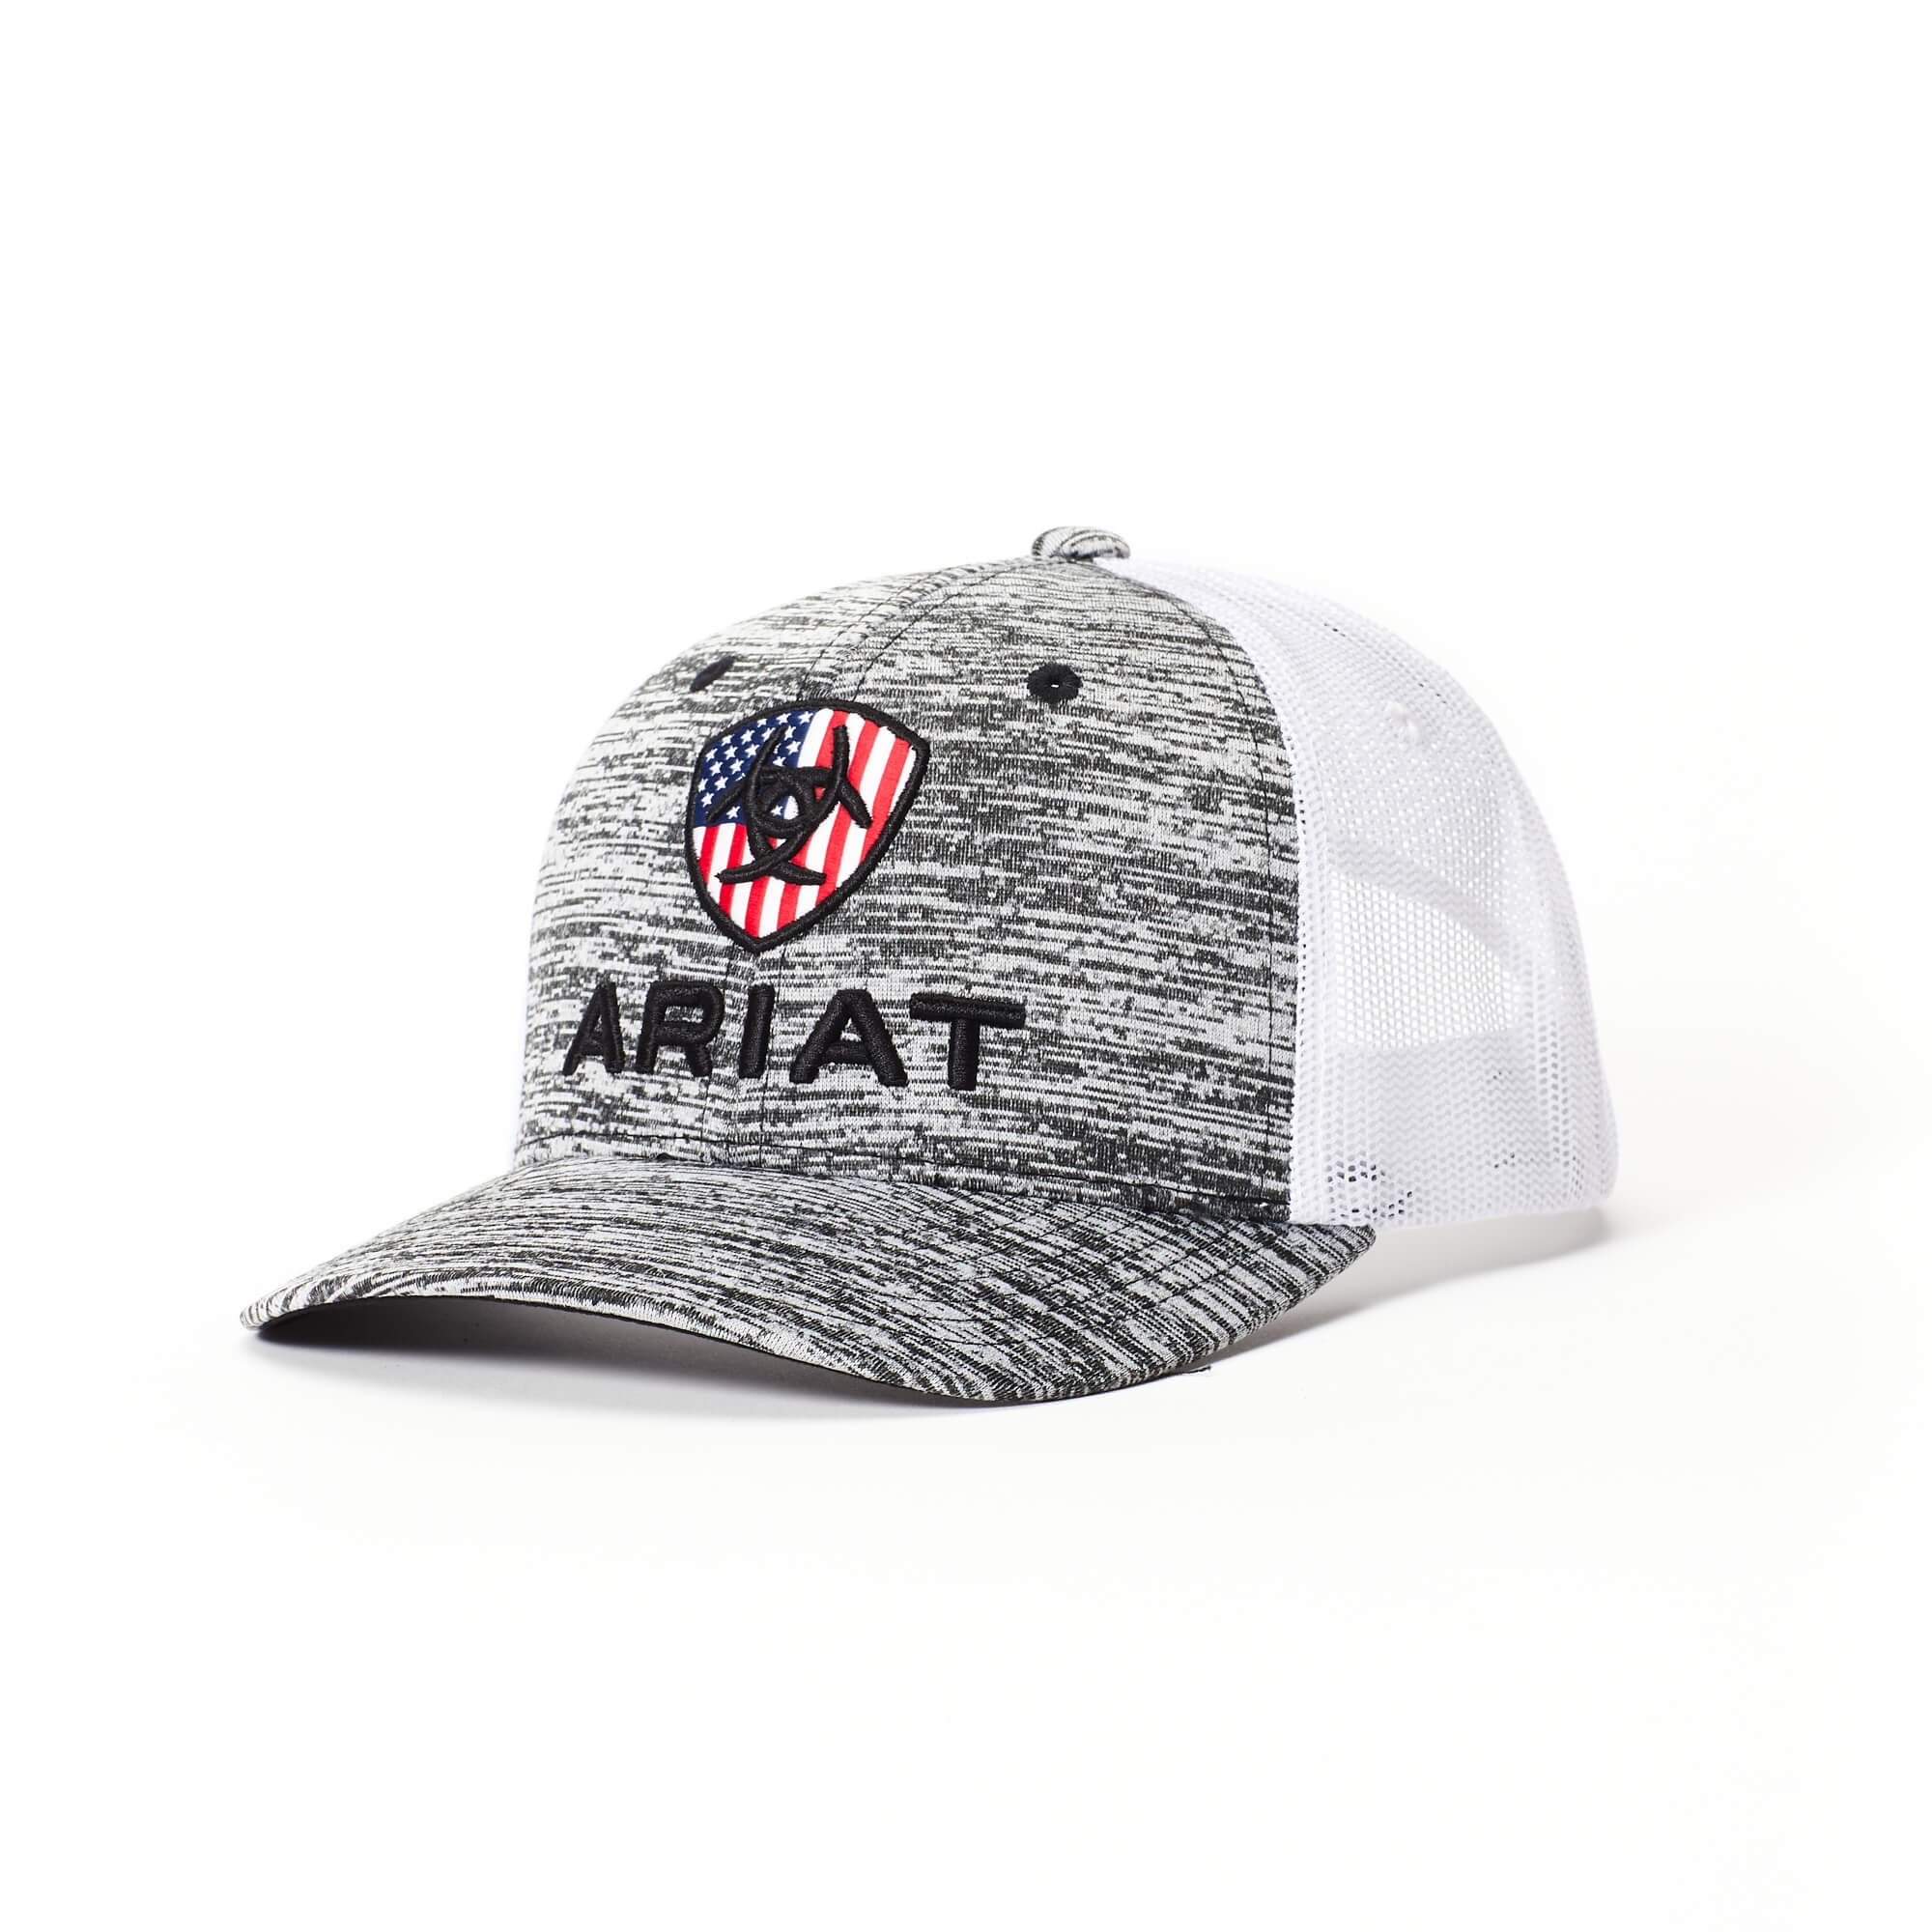 Kid's Flag Shield Mesh Snap Back Cap in Grey Polyester by Ariat